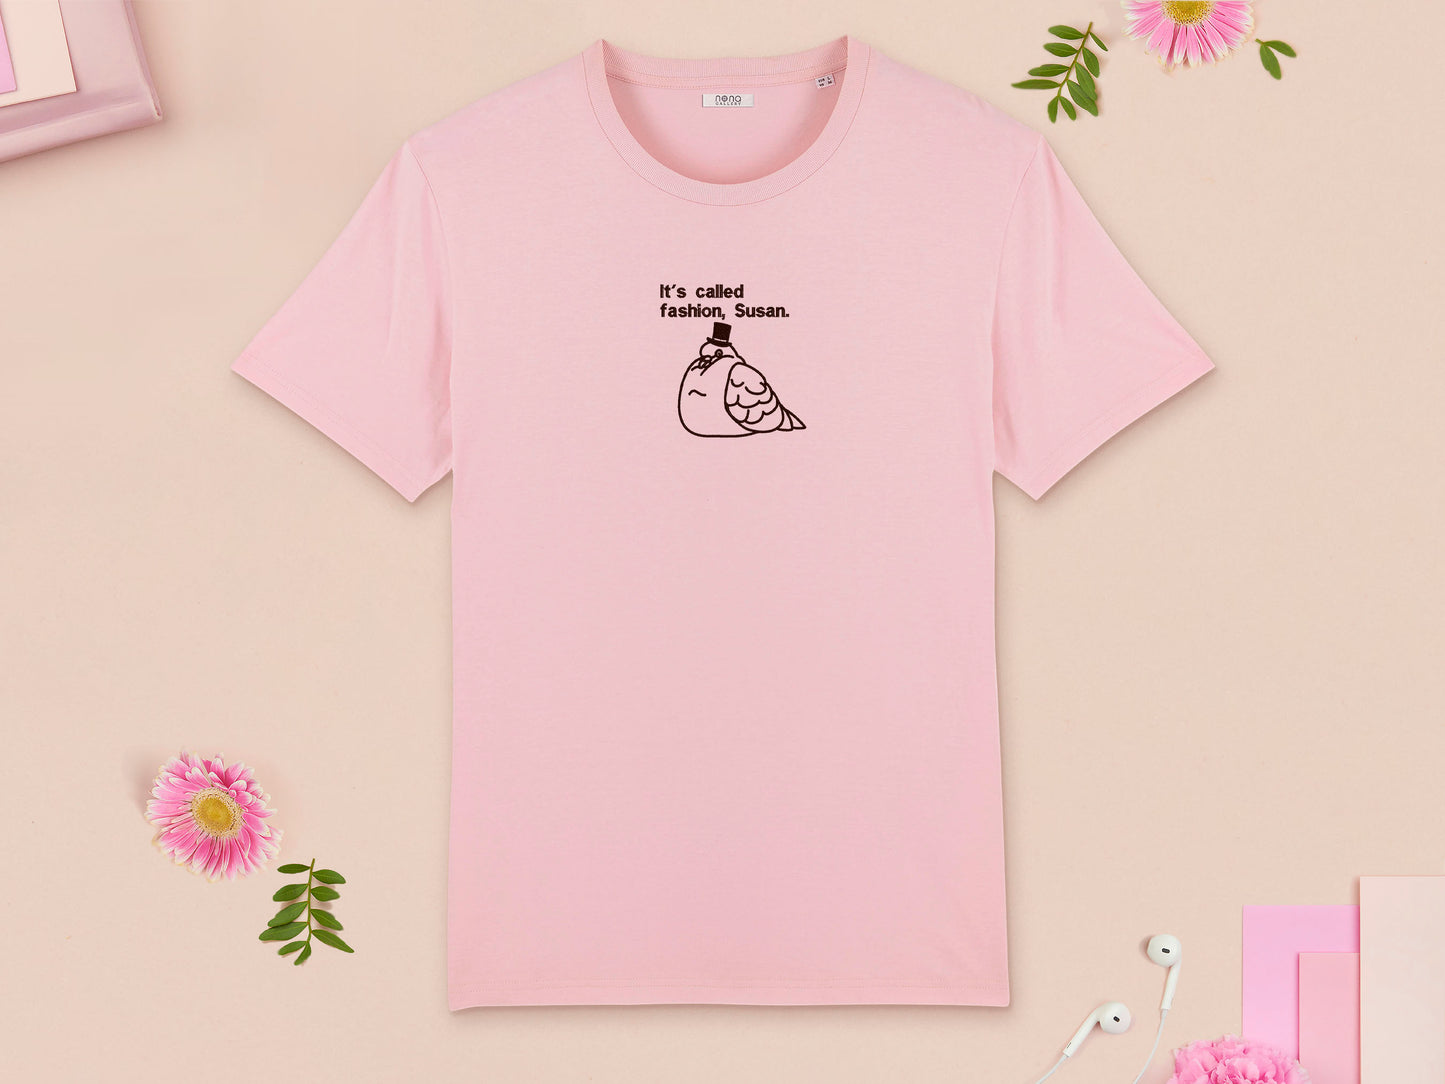 A pink crew neck short sleeve t-shirt, with an embroidered brown thread design of cute fat pigeon wearing a top hat with text underneath reading It's Called Fashion, Susan.